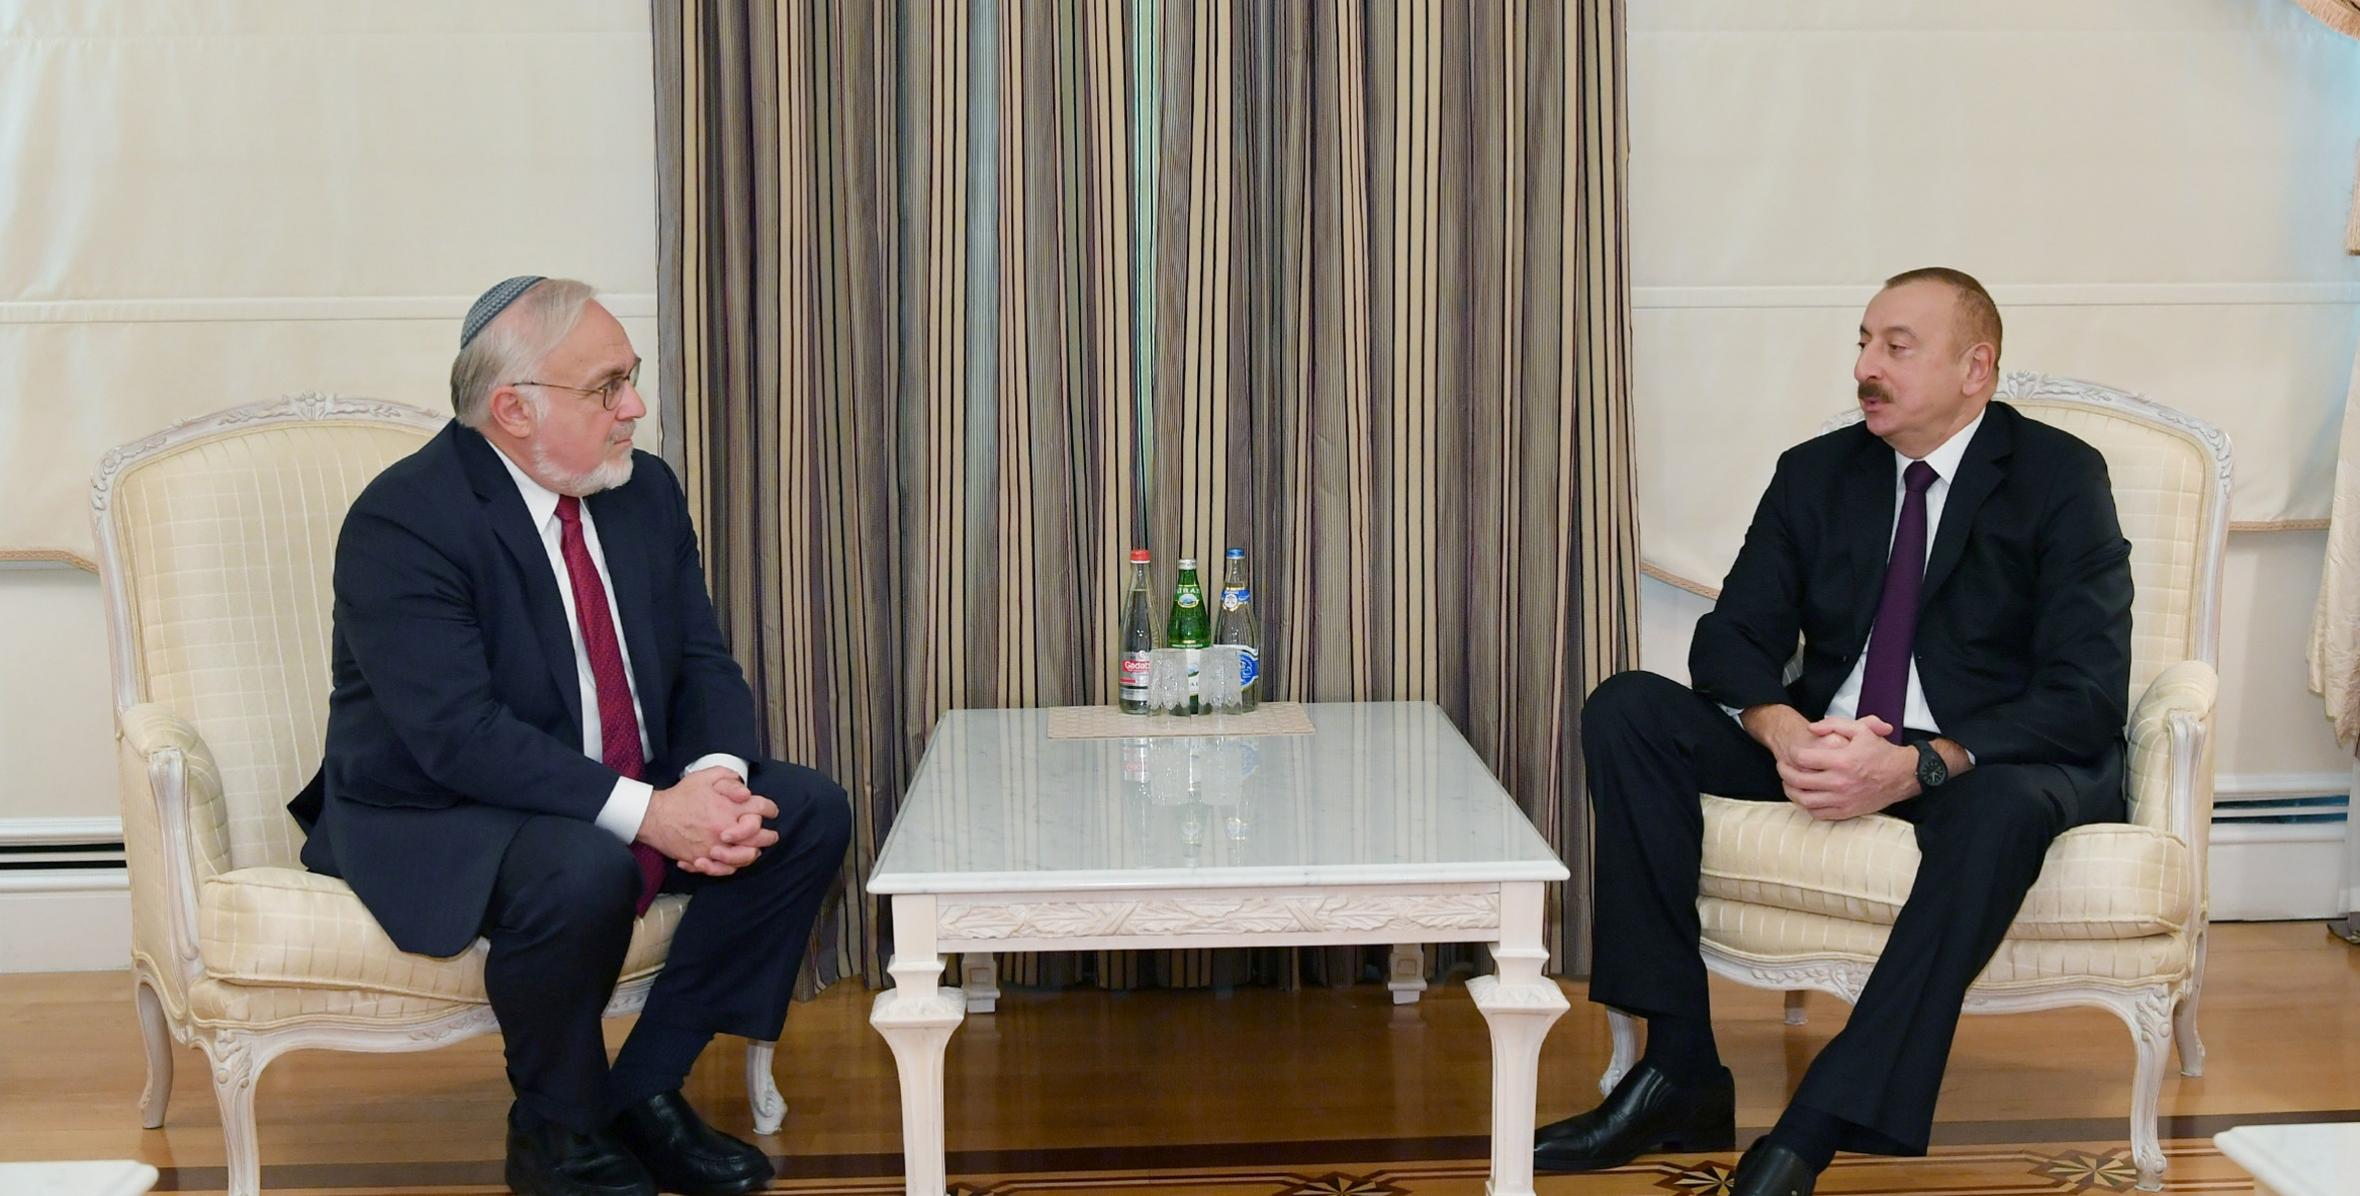 Ilham Aliyev received renowned US religious figures